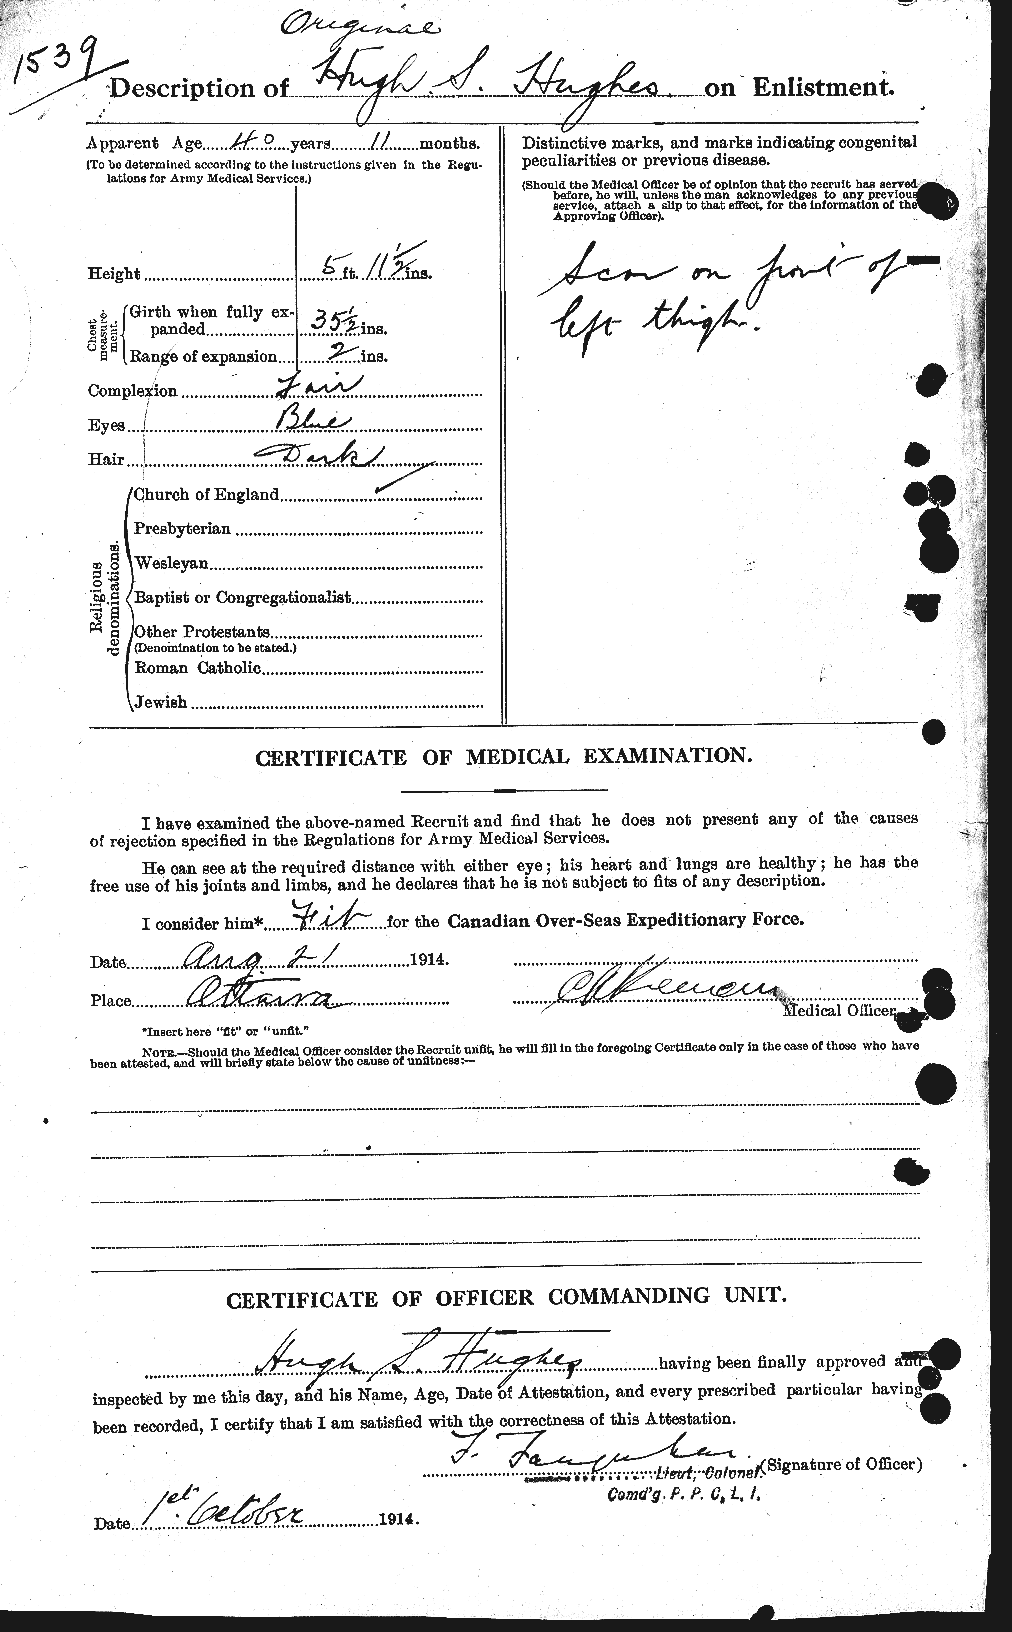 Personnel Records of the First World War - CEF 403928b